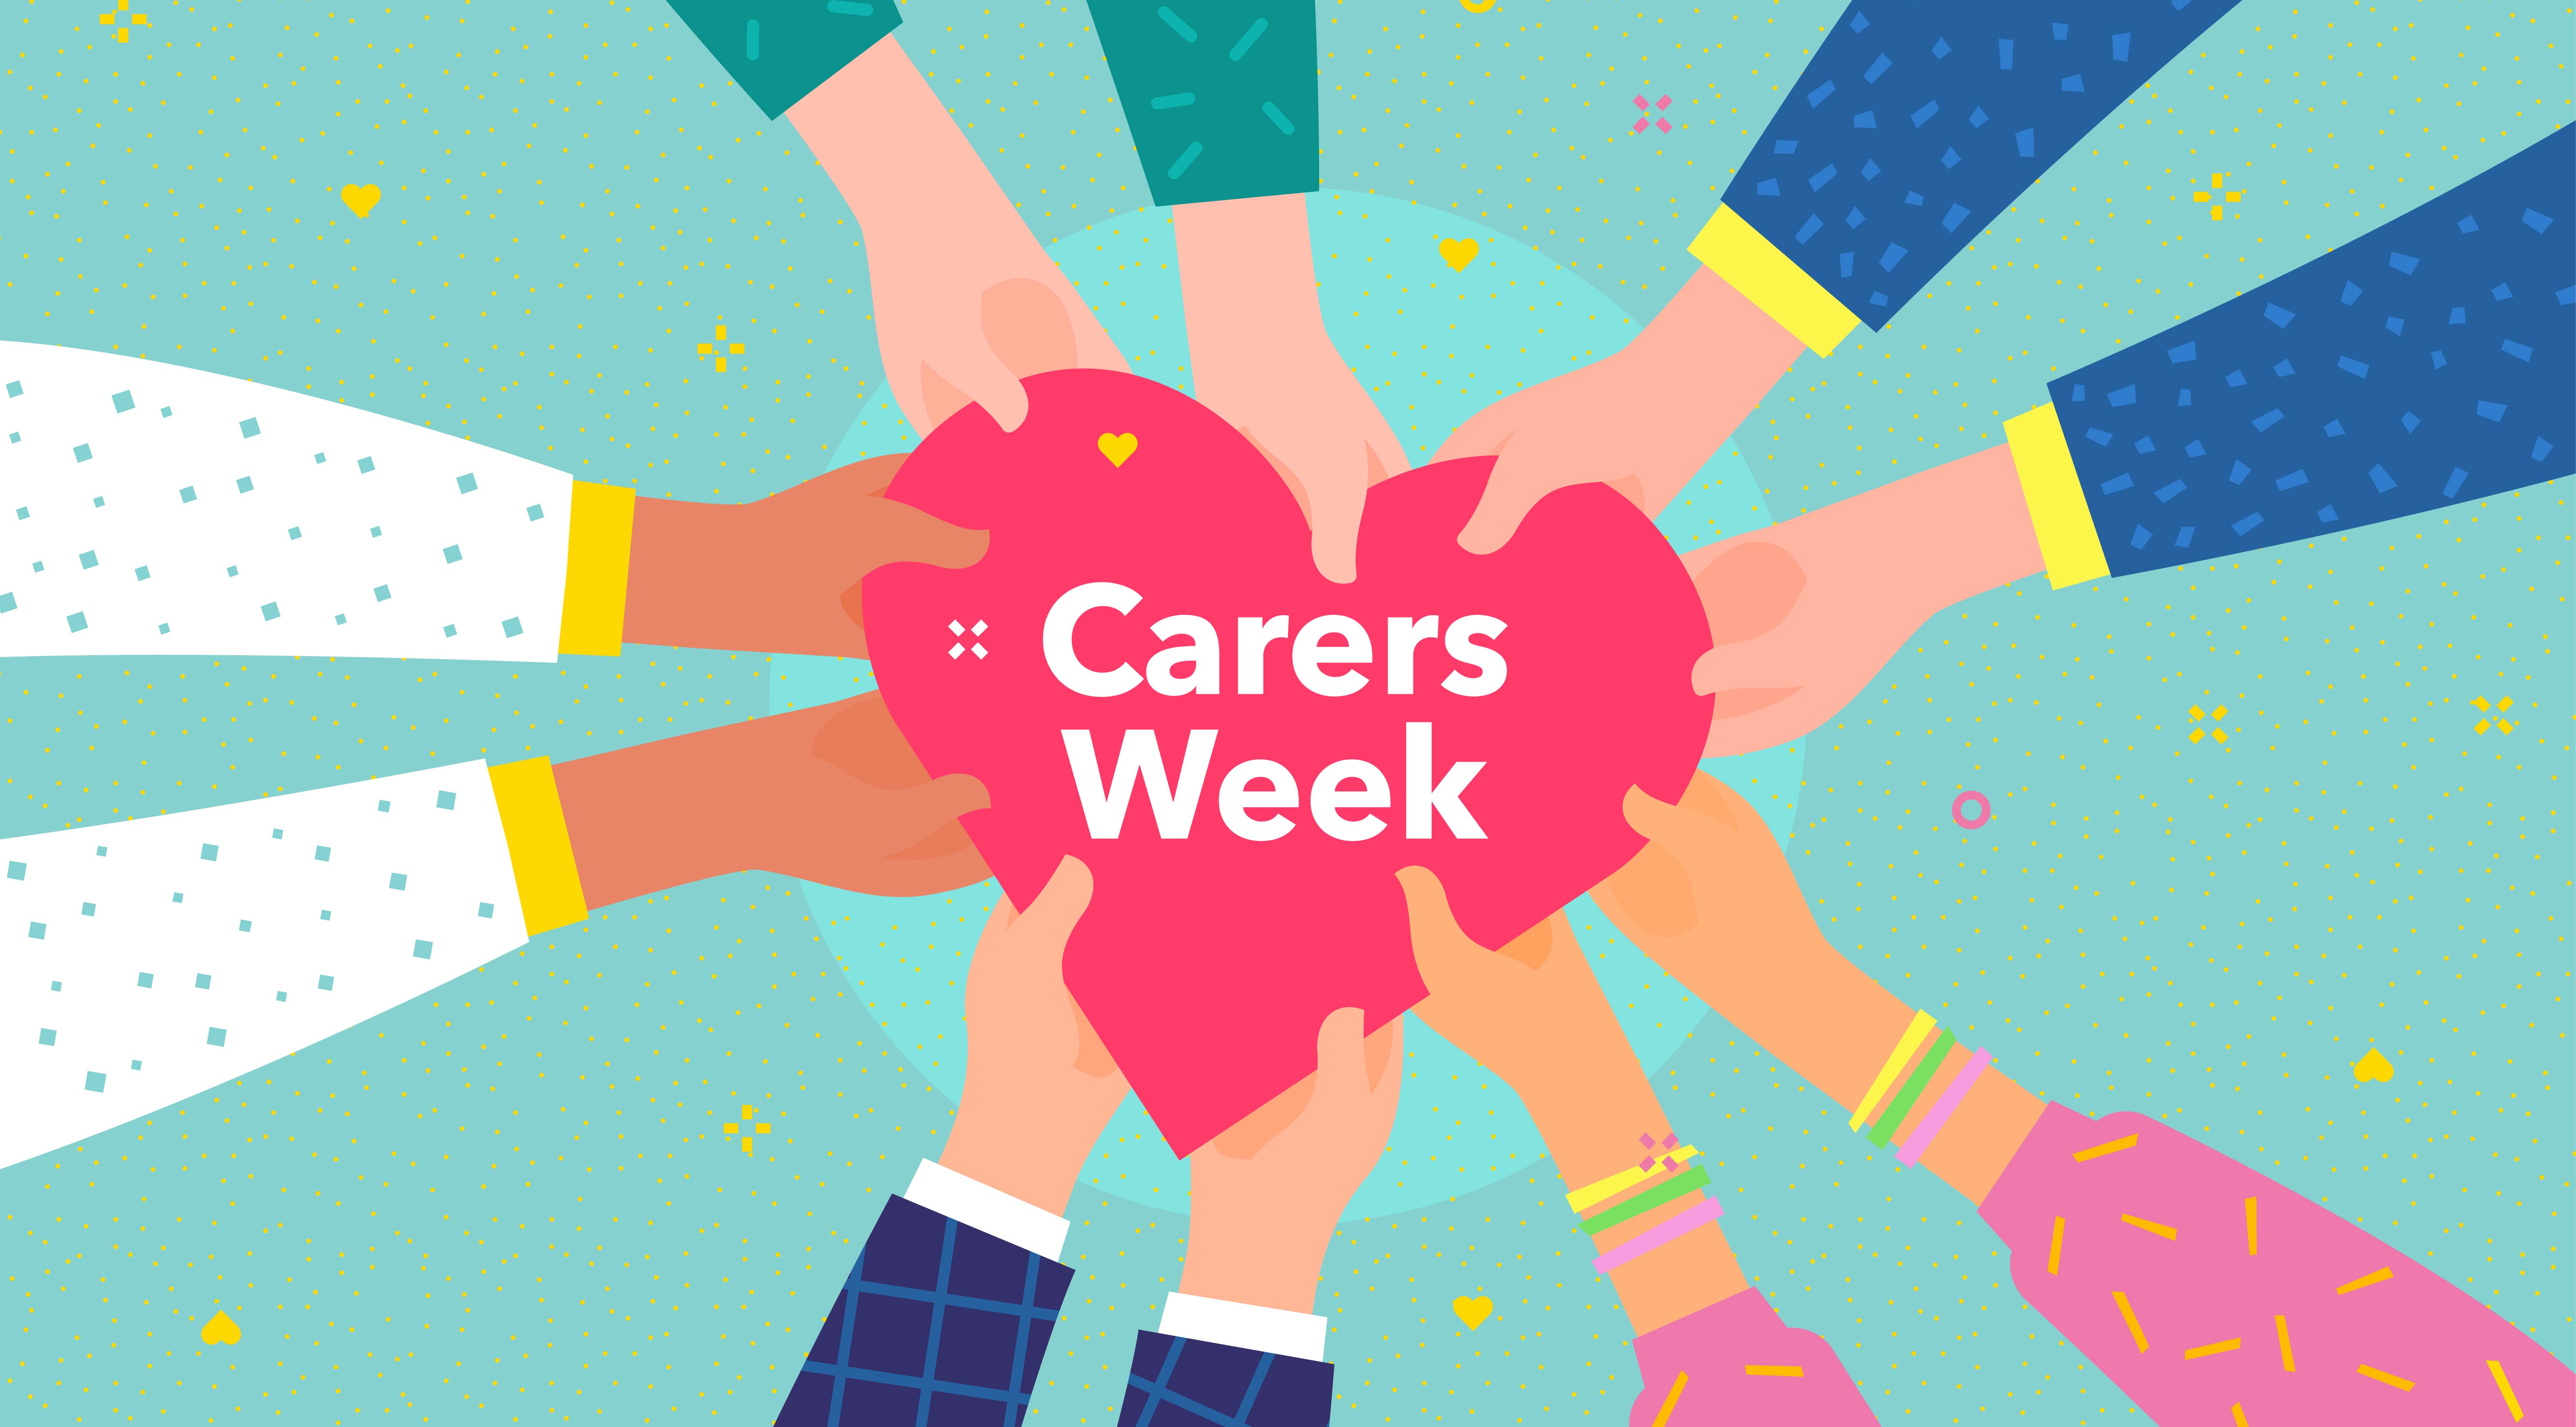 Illustration of hands holding a pink heart. The heart says Carers Week.